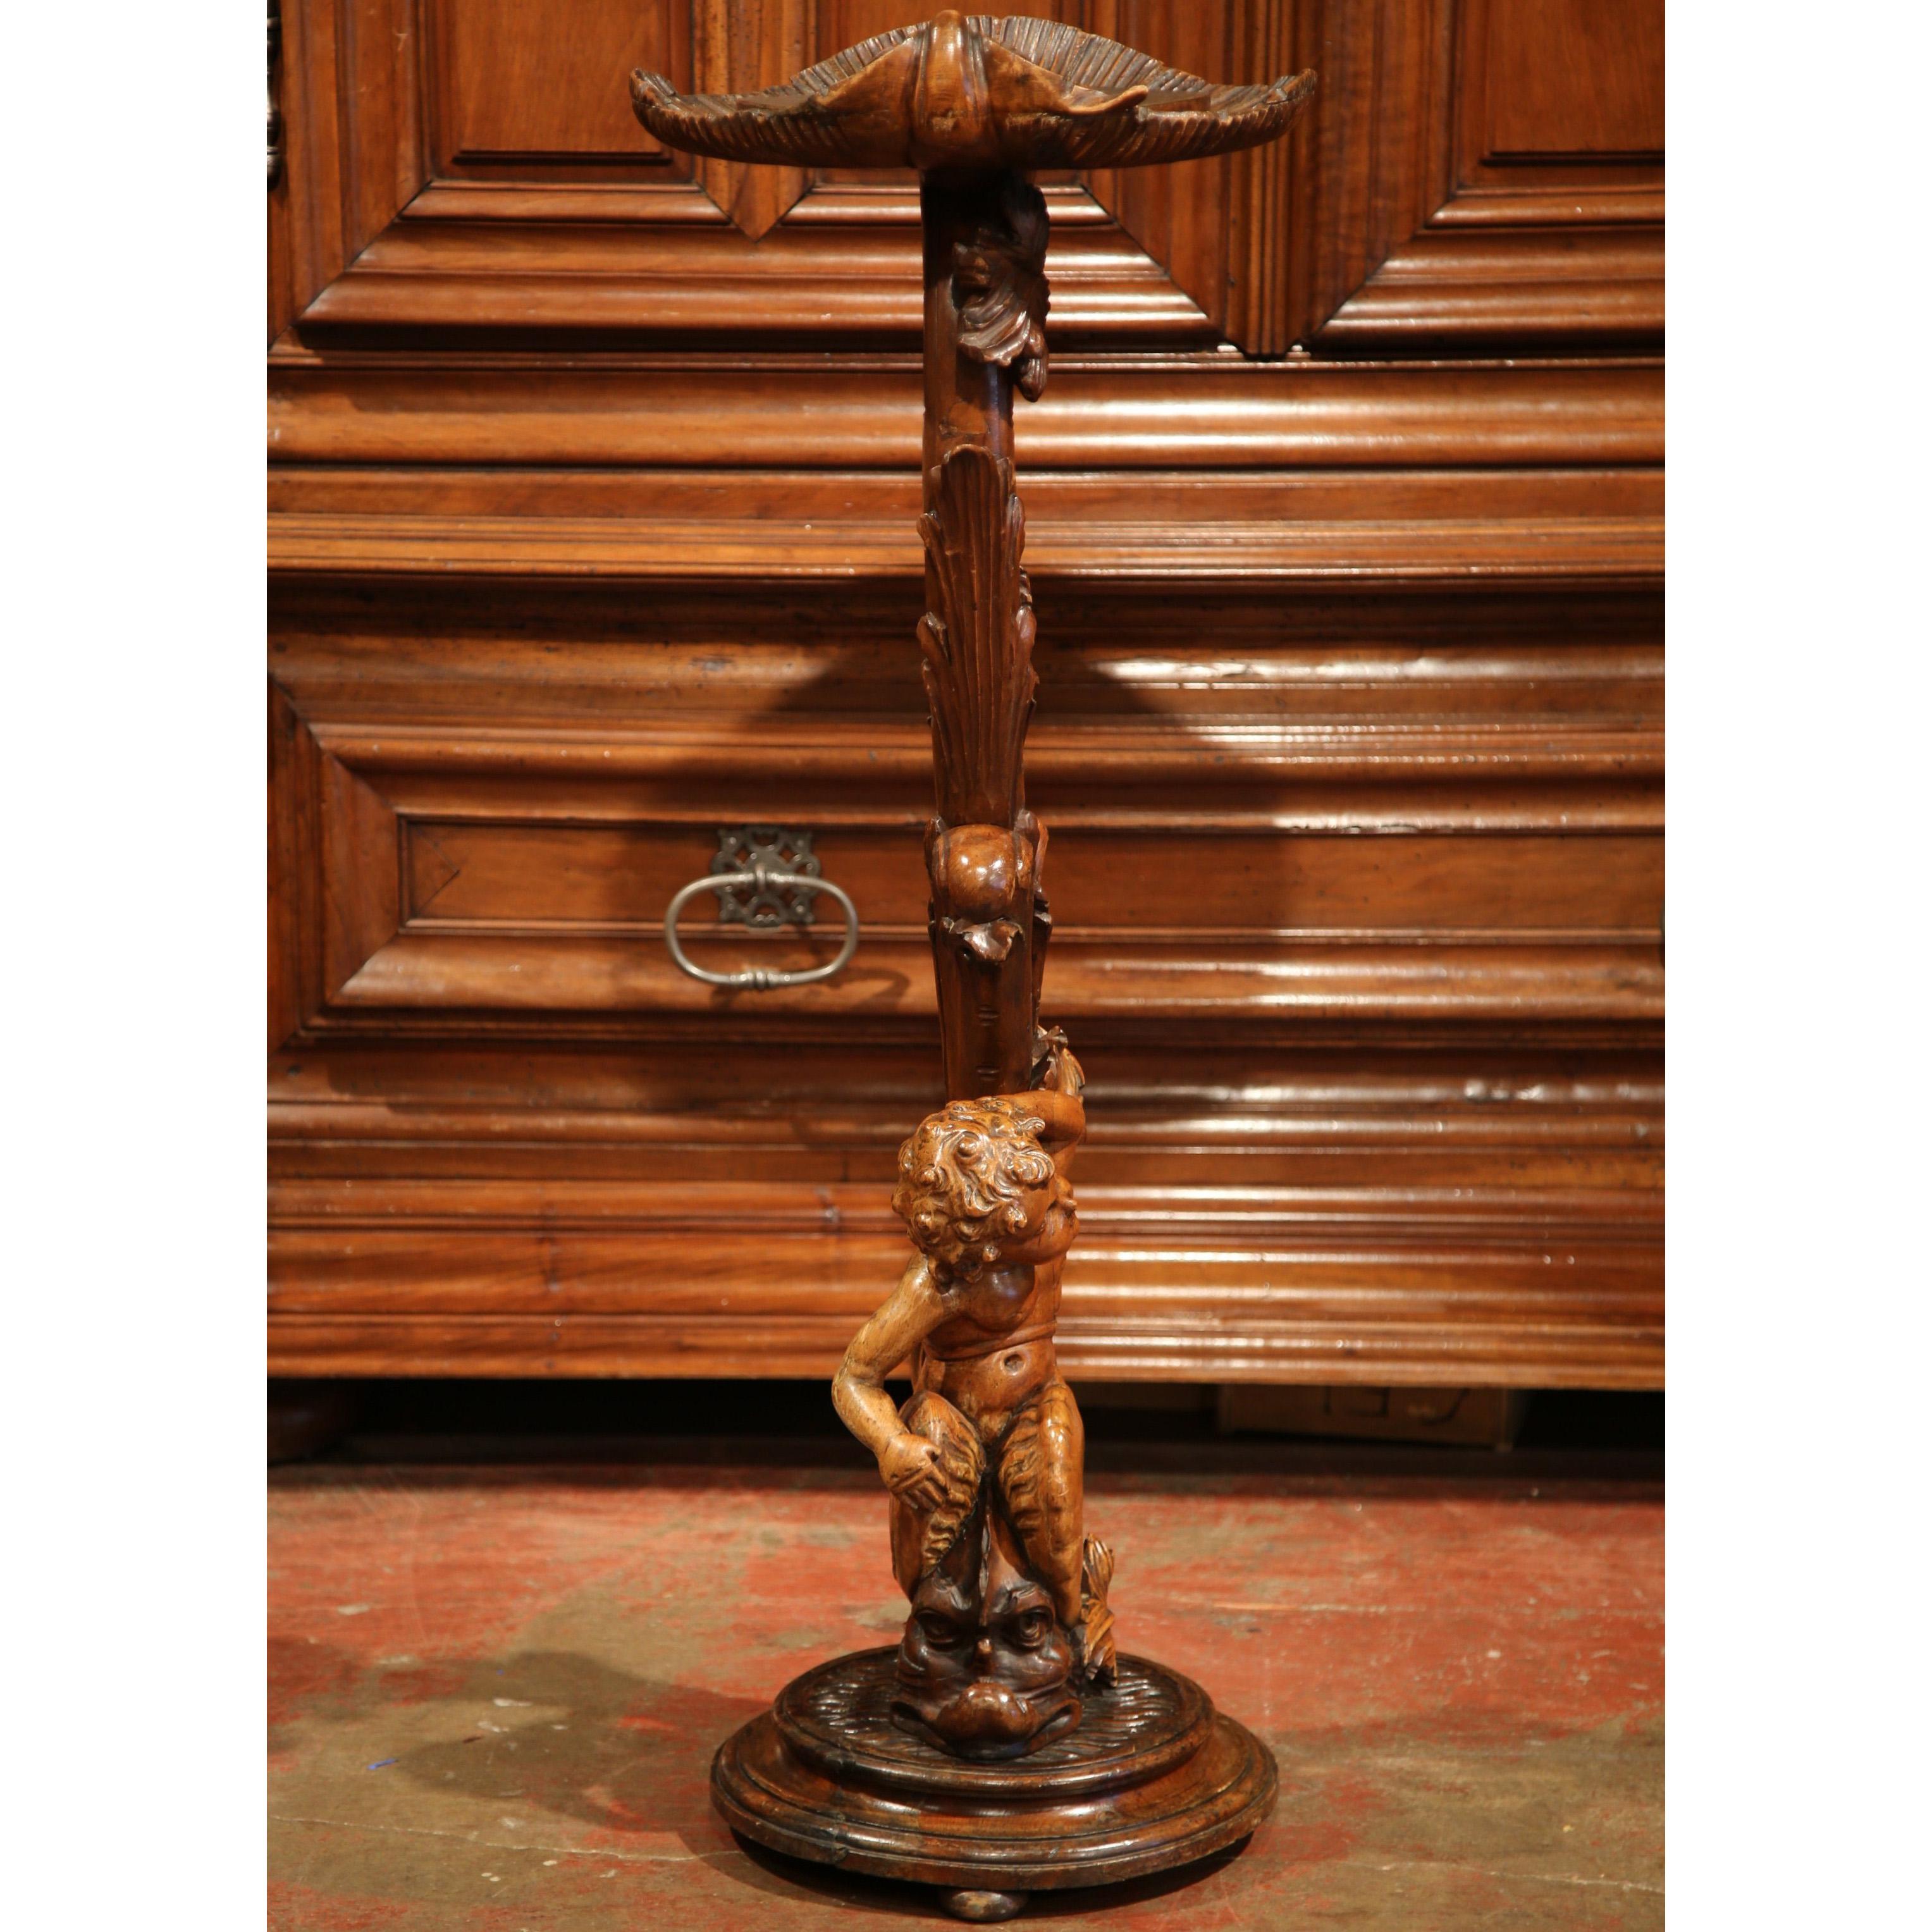 This beautiful, antique fruitwood Selette was crafted in Italy, circa 1860. The carved wooden pedestal stands on a round base and features a scrolled stem in a form of a tree with leaves, and embellished with an expressive cherub at the base sitting